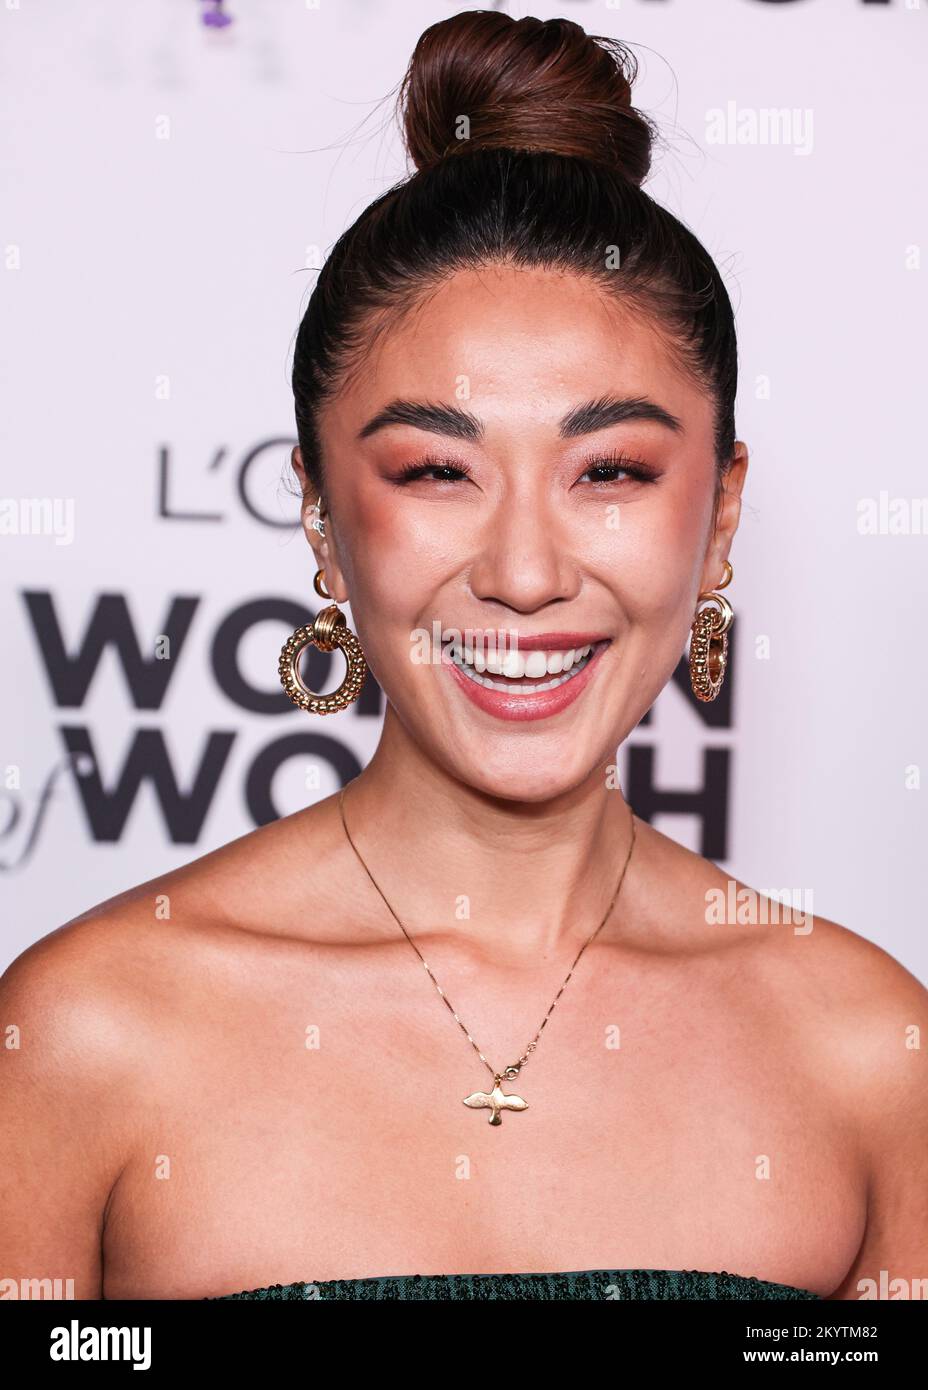 Los Angeles, United States. 01st Dec, 2022. LOS ANGELES, CALIFORNIA, USA - DECEMBER 01: Soo Youn Lee arrives at the L'Oreal Paris' Women Of Worth Celebration 2022 held at The Ebell of Los Angeles on December 1, 2022 in Los Angeles, California, United States. (Photo by Xavier Collin/Image Press Agency) Credit: Image Press Agency/Alamy Live News Stock Photo